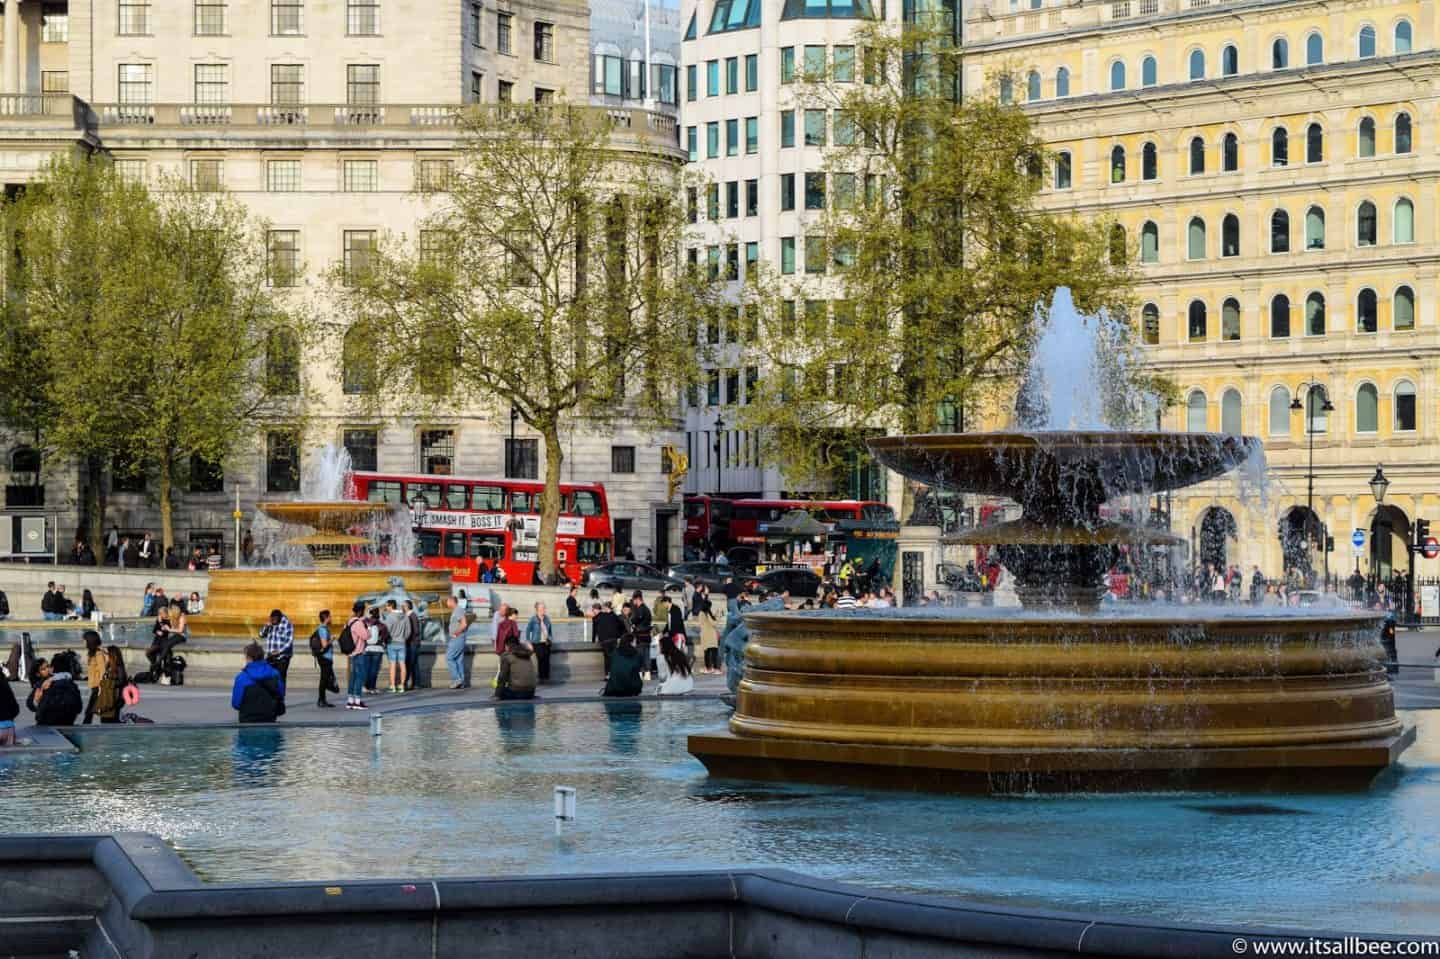 london central area | safe area to live in london | safest places in london to live | best london hotels for sightseeing | cheap areas to stay in london hotels in london near attractions 